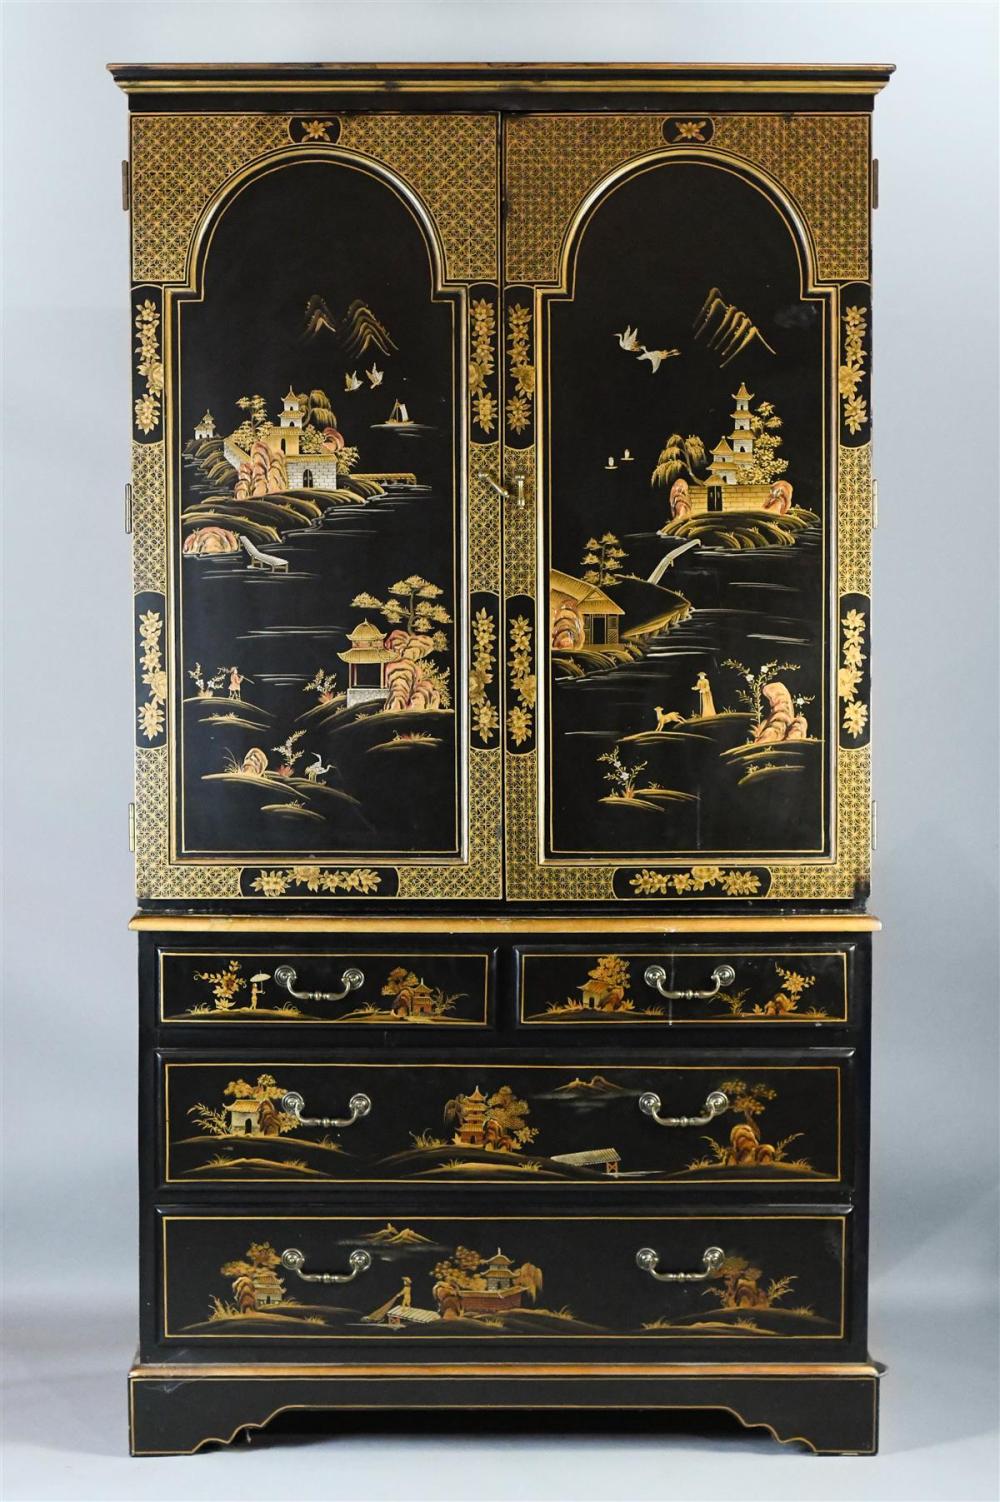 GEORGE III STYLE CHINOISERIE DECORATED 33abcd